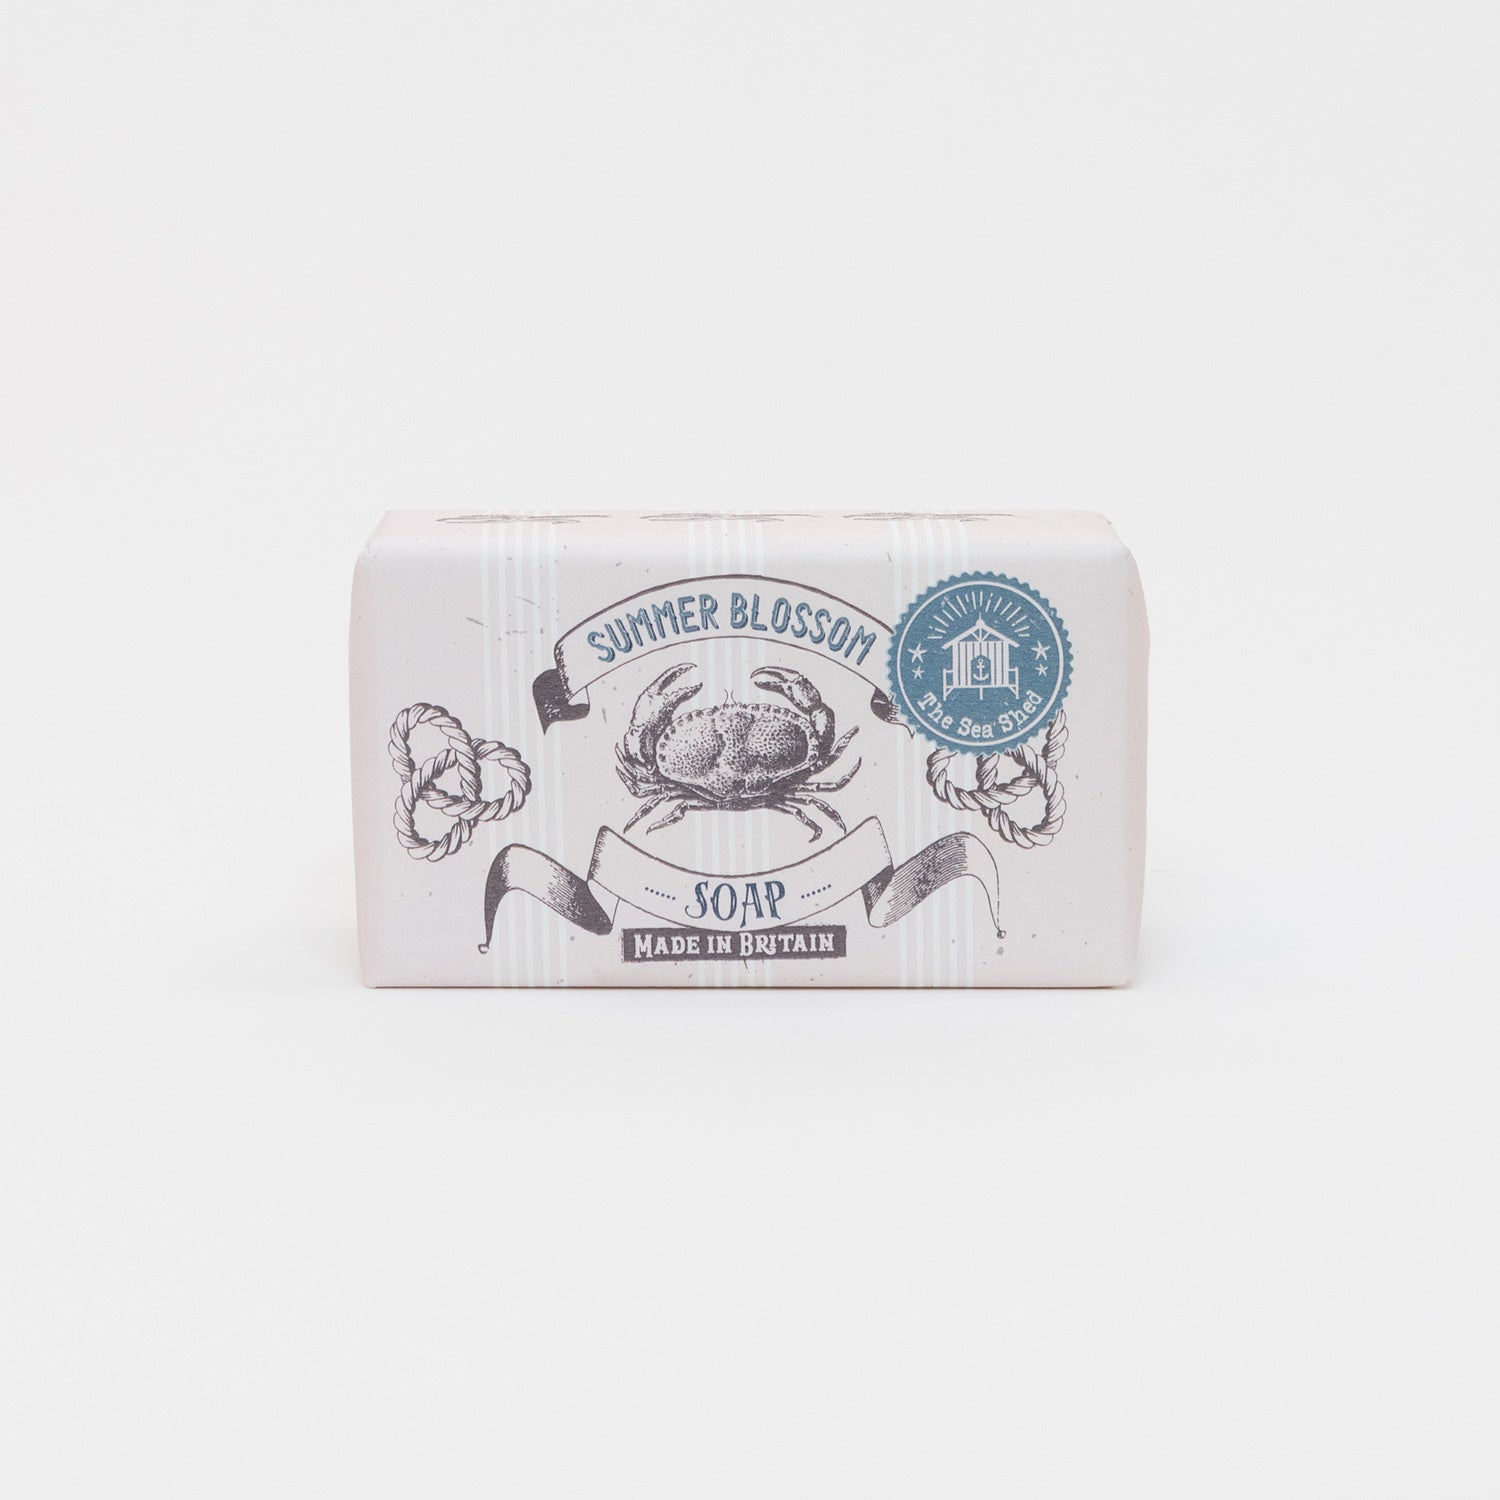 A photo of packaged summer blossom soap on a white background. The soap has white packaging with illustrations of a crap and rope.